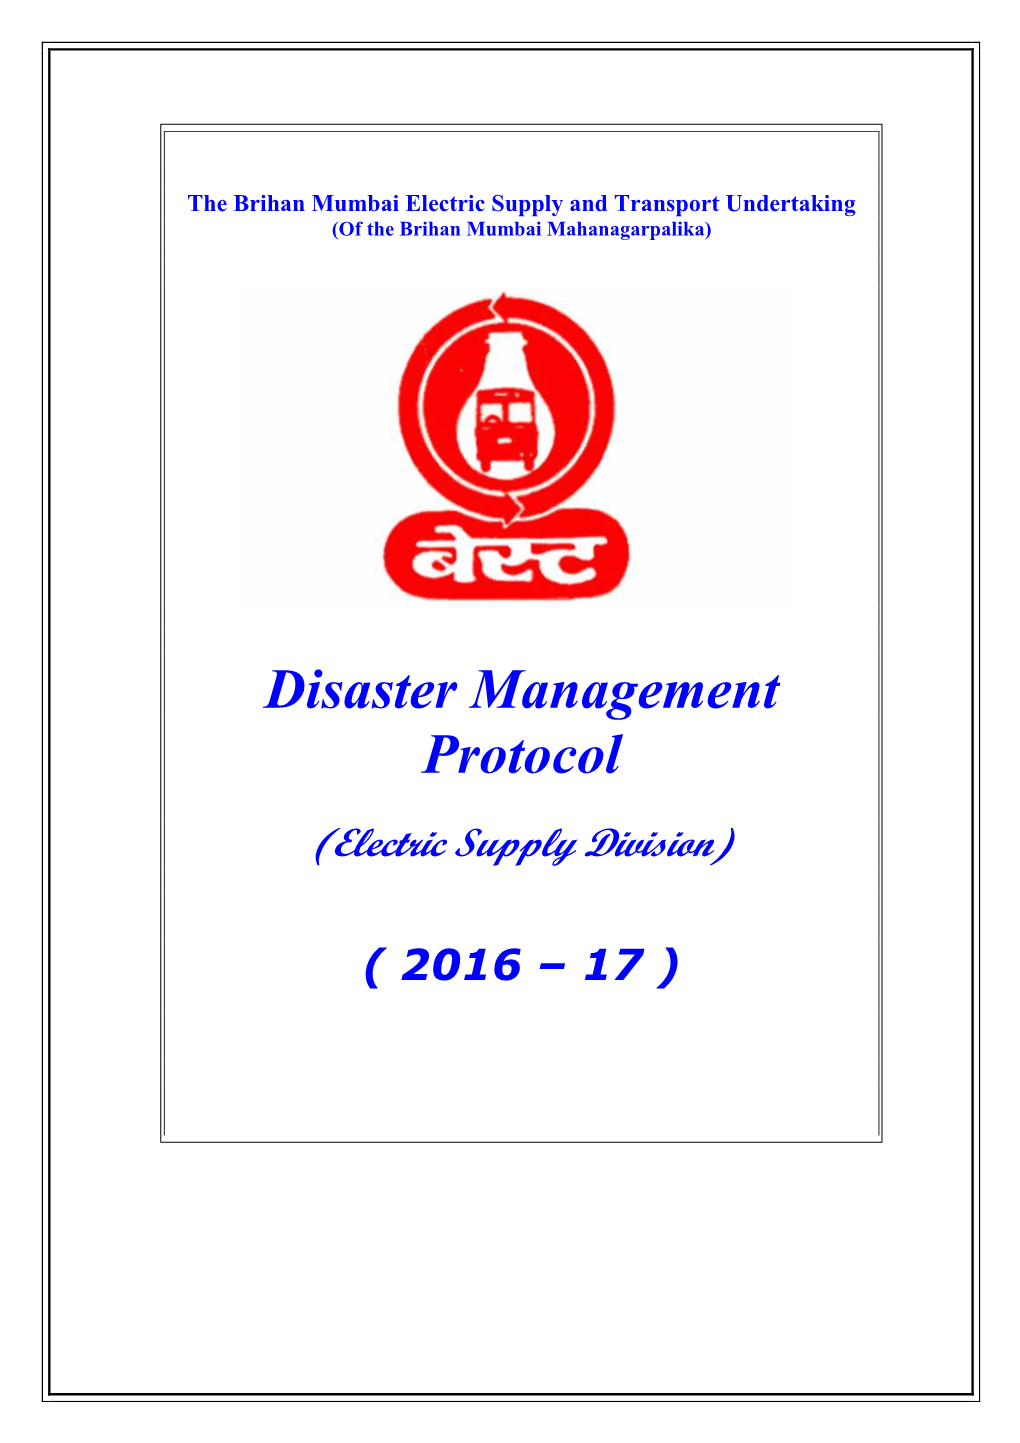 Disaster Management Protocol for the Year 2016-17